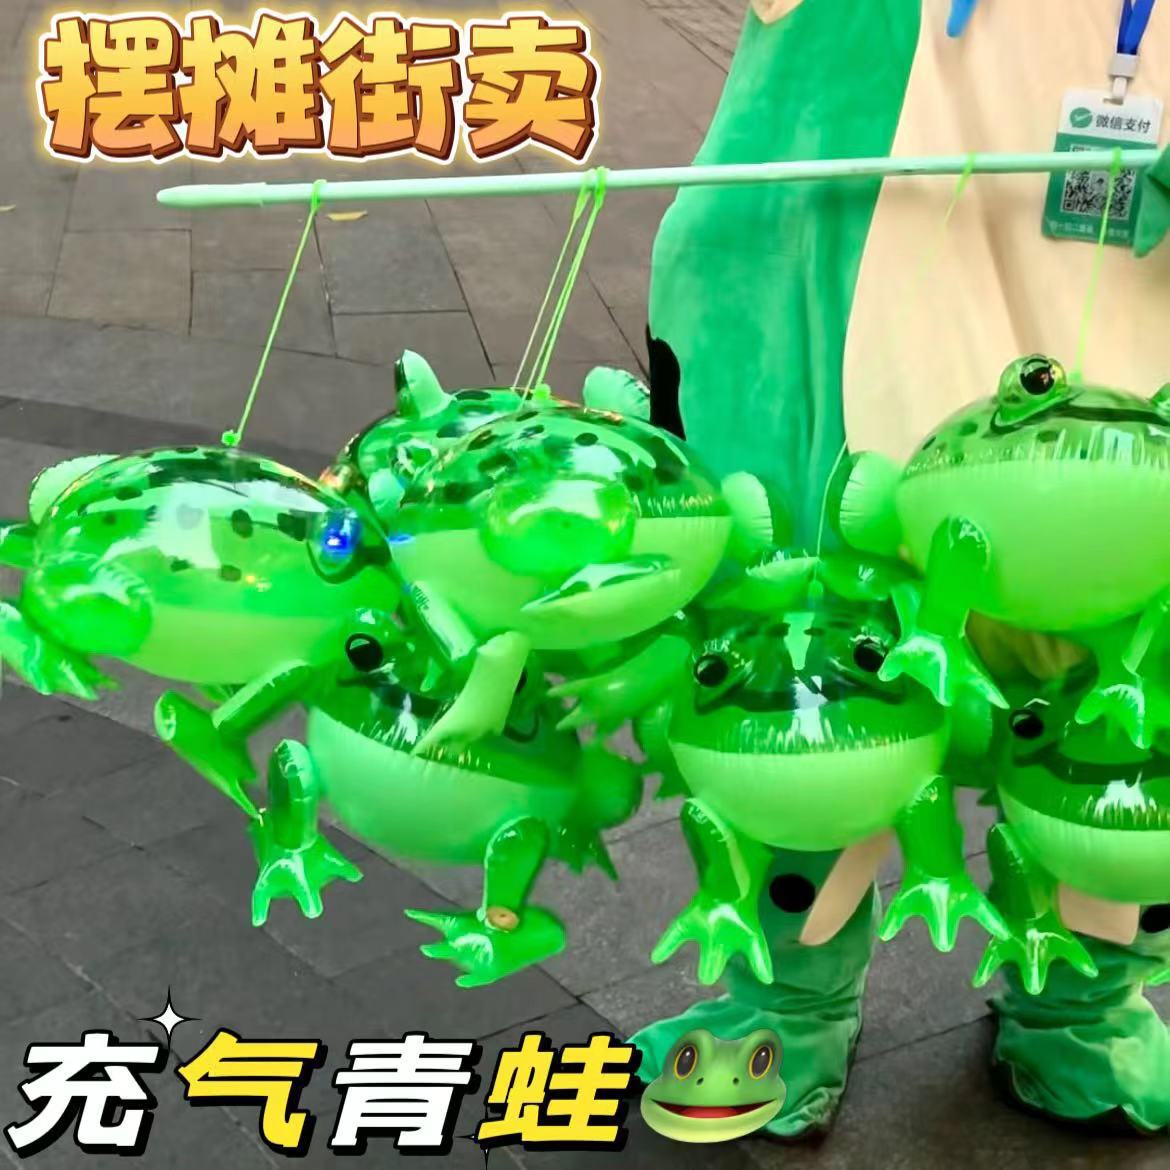 Internet Celebrity Inflatable Frog Balloon Batch Luminous Selling Baby Son Selling Inflatable Toys Children Night Market Stall